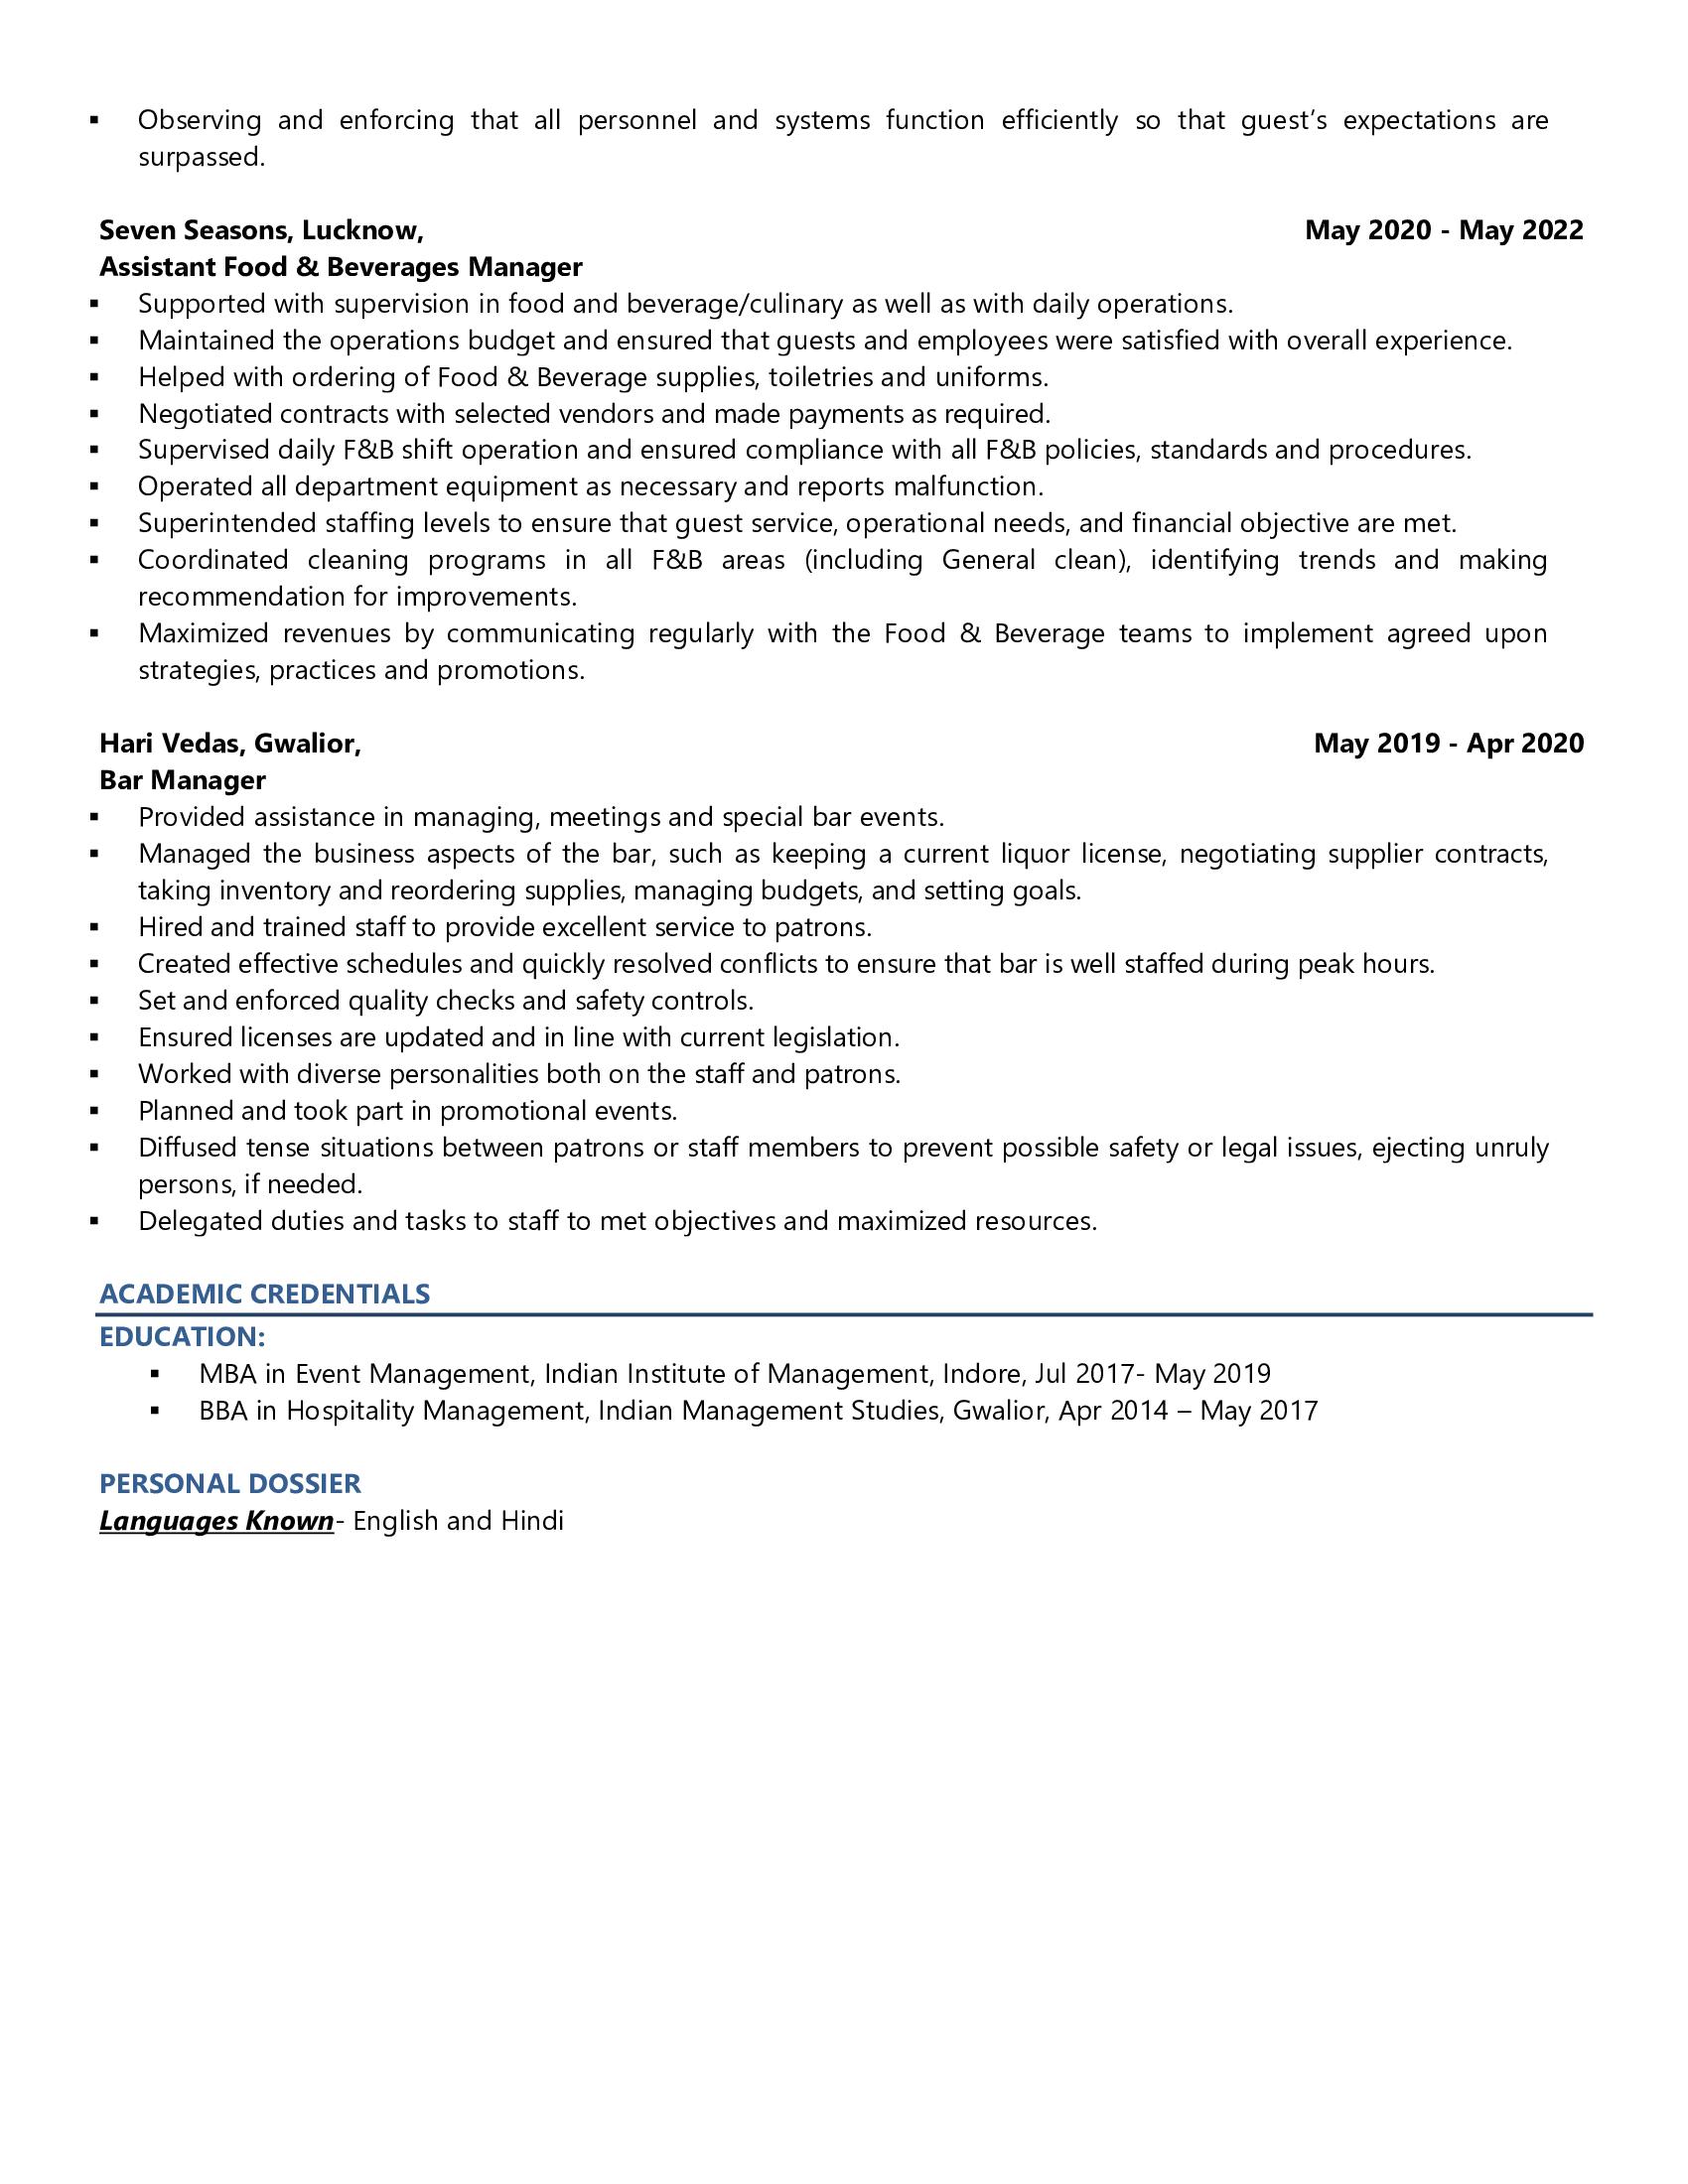 Food & Beverage (F&B) Manager - Resume Example & Template